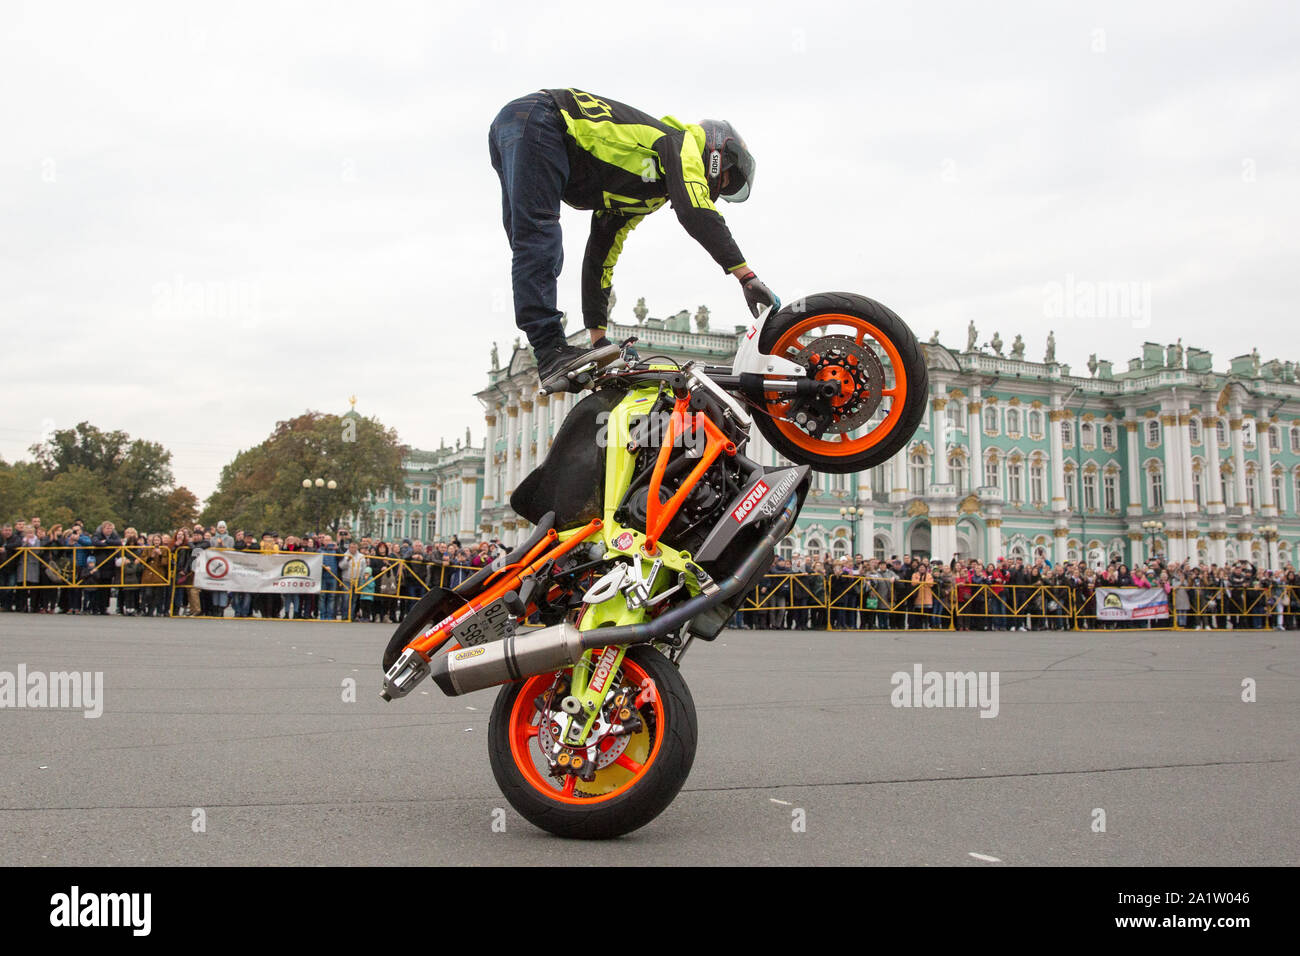 St. Petersburg, Russia. 28th Sep, 2019. A motorcyclist performs during the ending ceremony of the Motorcycle Season in St. Petersburg, Russia, Sept. 28, 2019. Thousands of motorcycles gathered at the Palace Square on Saturday to mark the ending of Motorcycle Season of Russia. Credit: Irina Motina/Xinhua/Alamy Live News Stock Photo